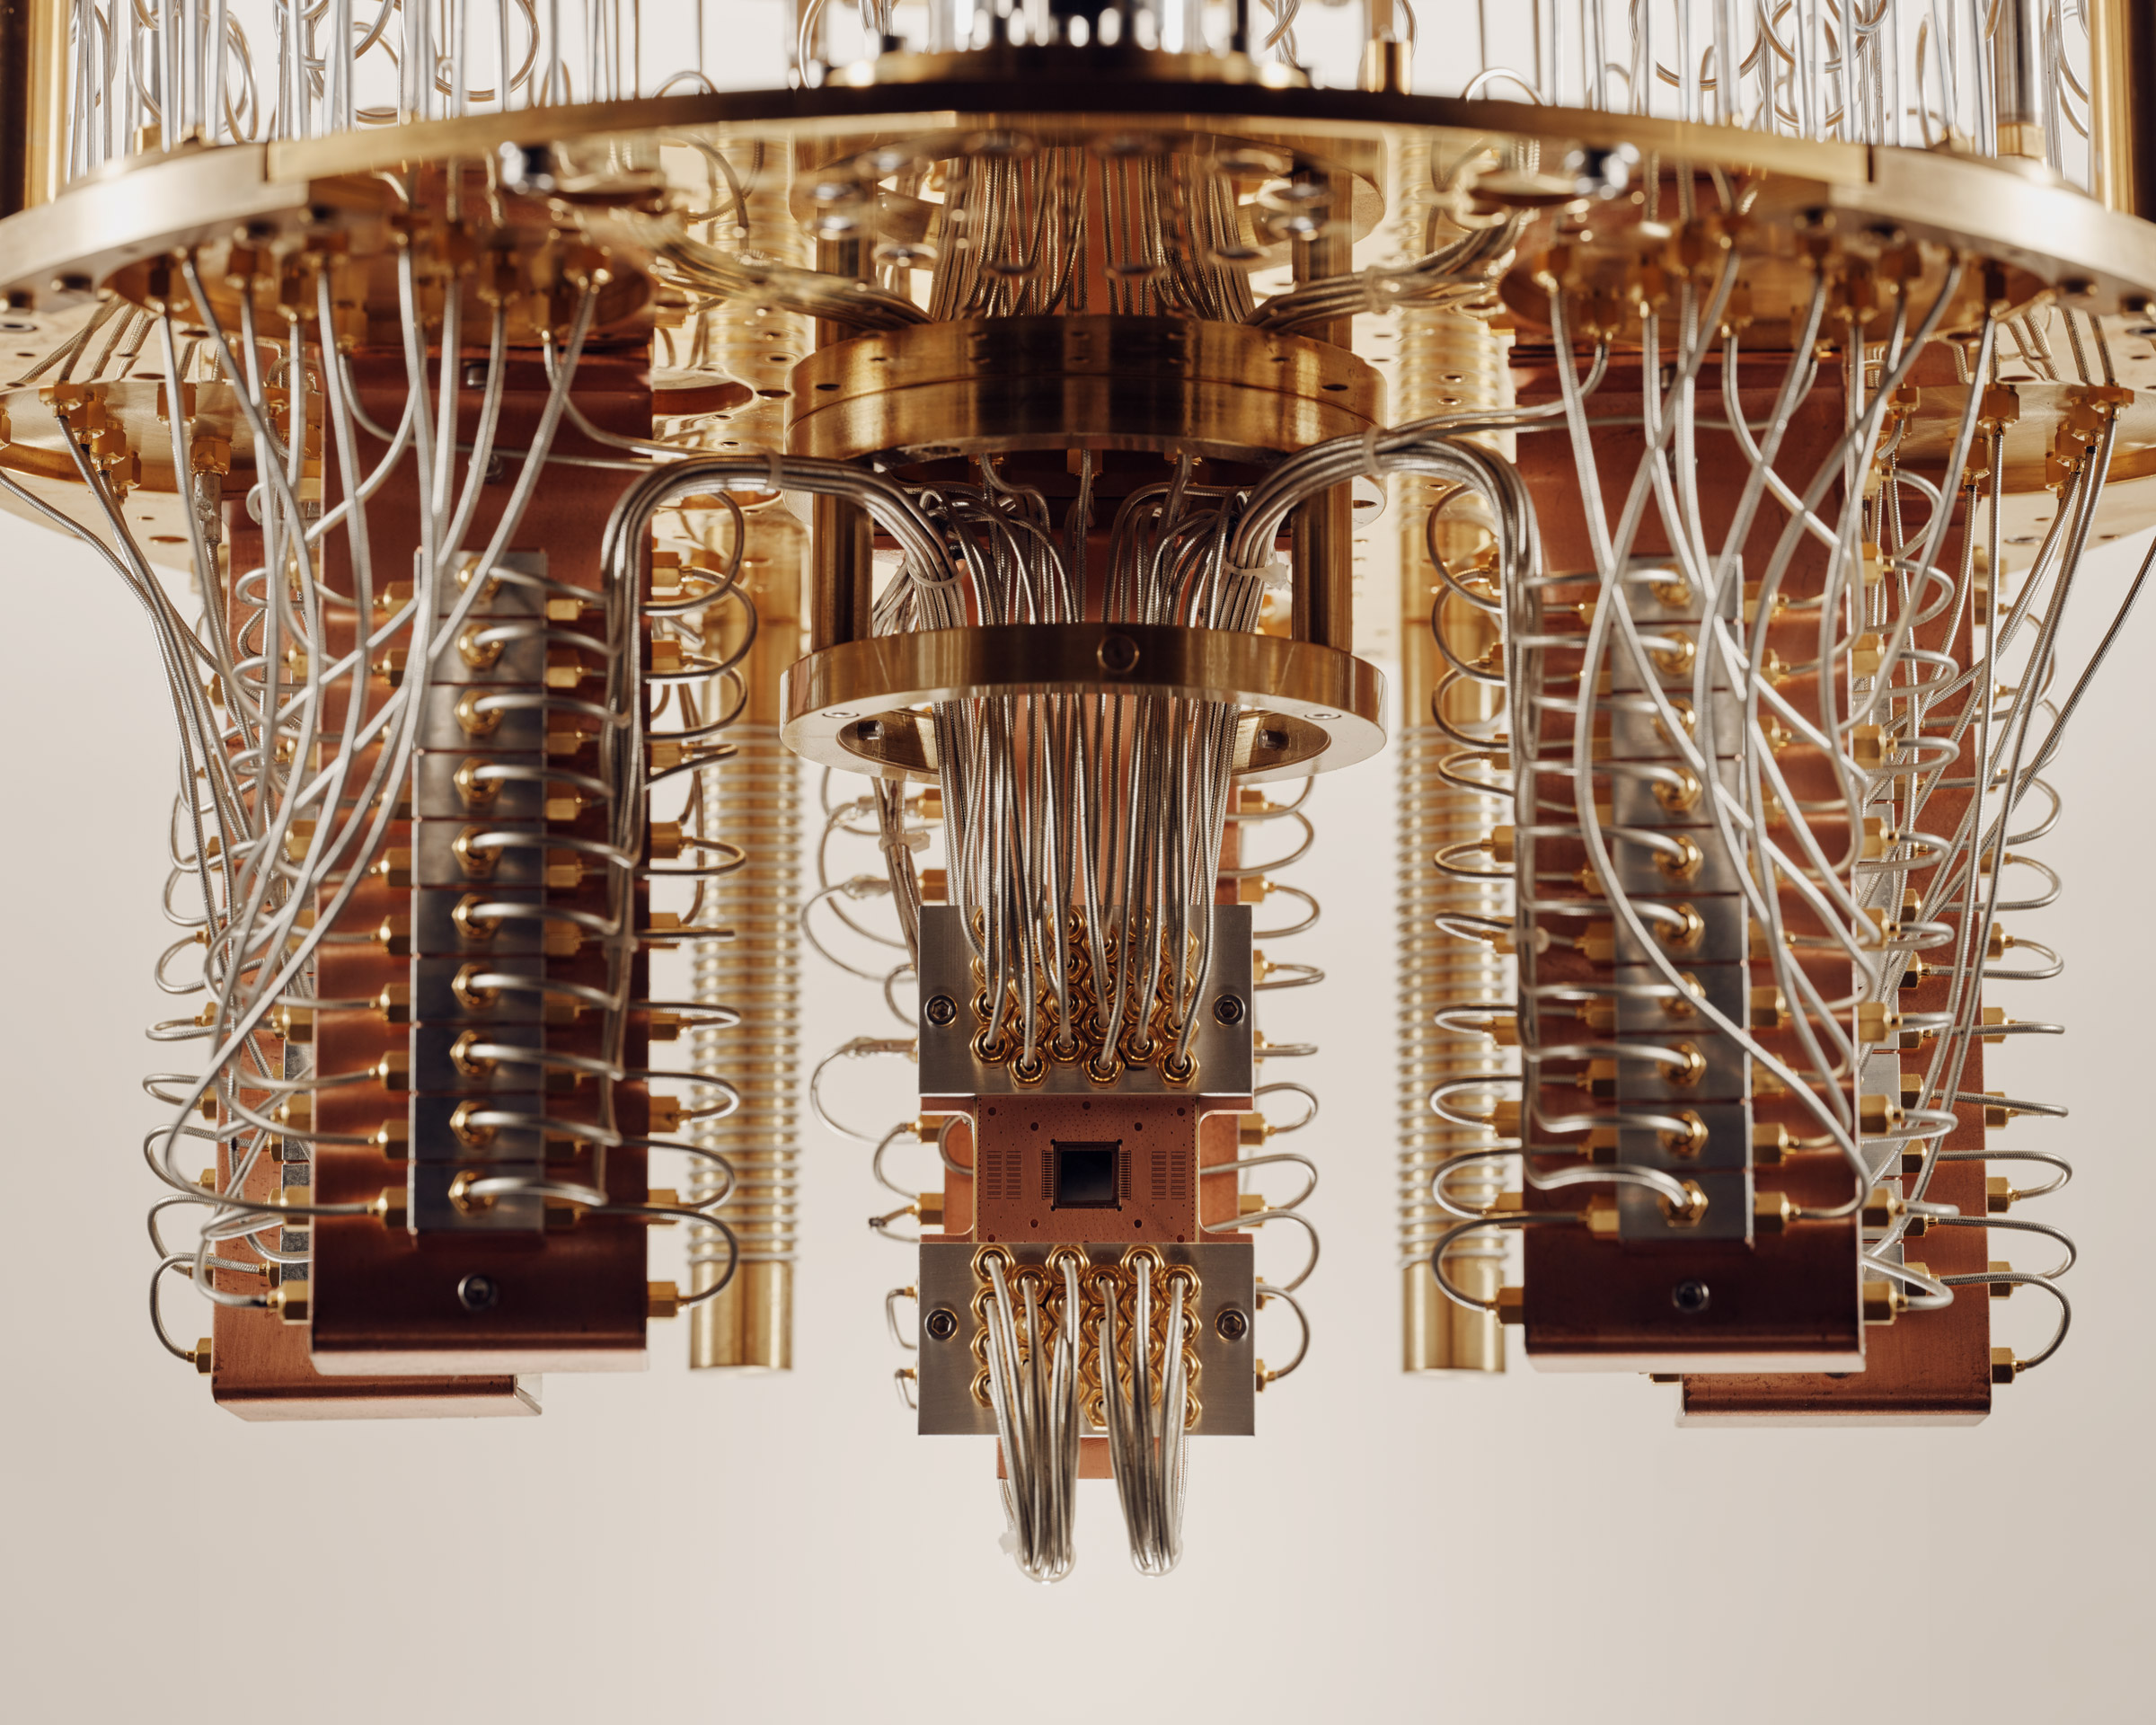 The “chandelier” inside a quantum computer is designed to cool its processing chip to a temperature lower than outer space. (Thomas Prior for TIME)